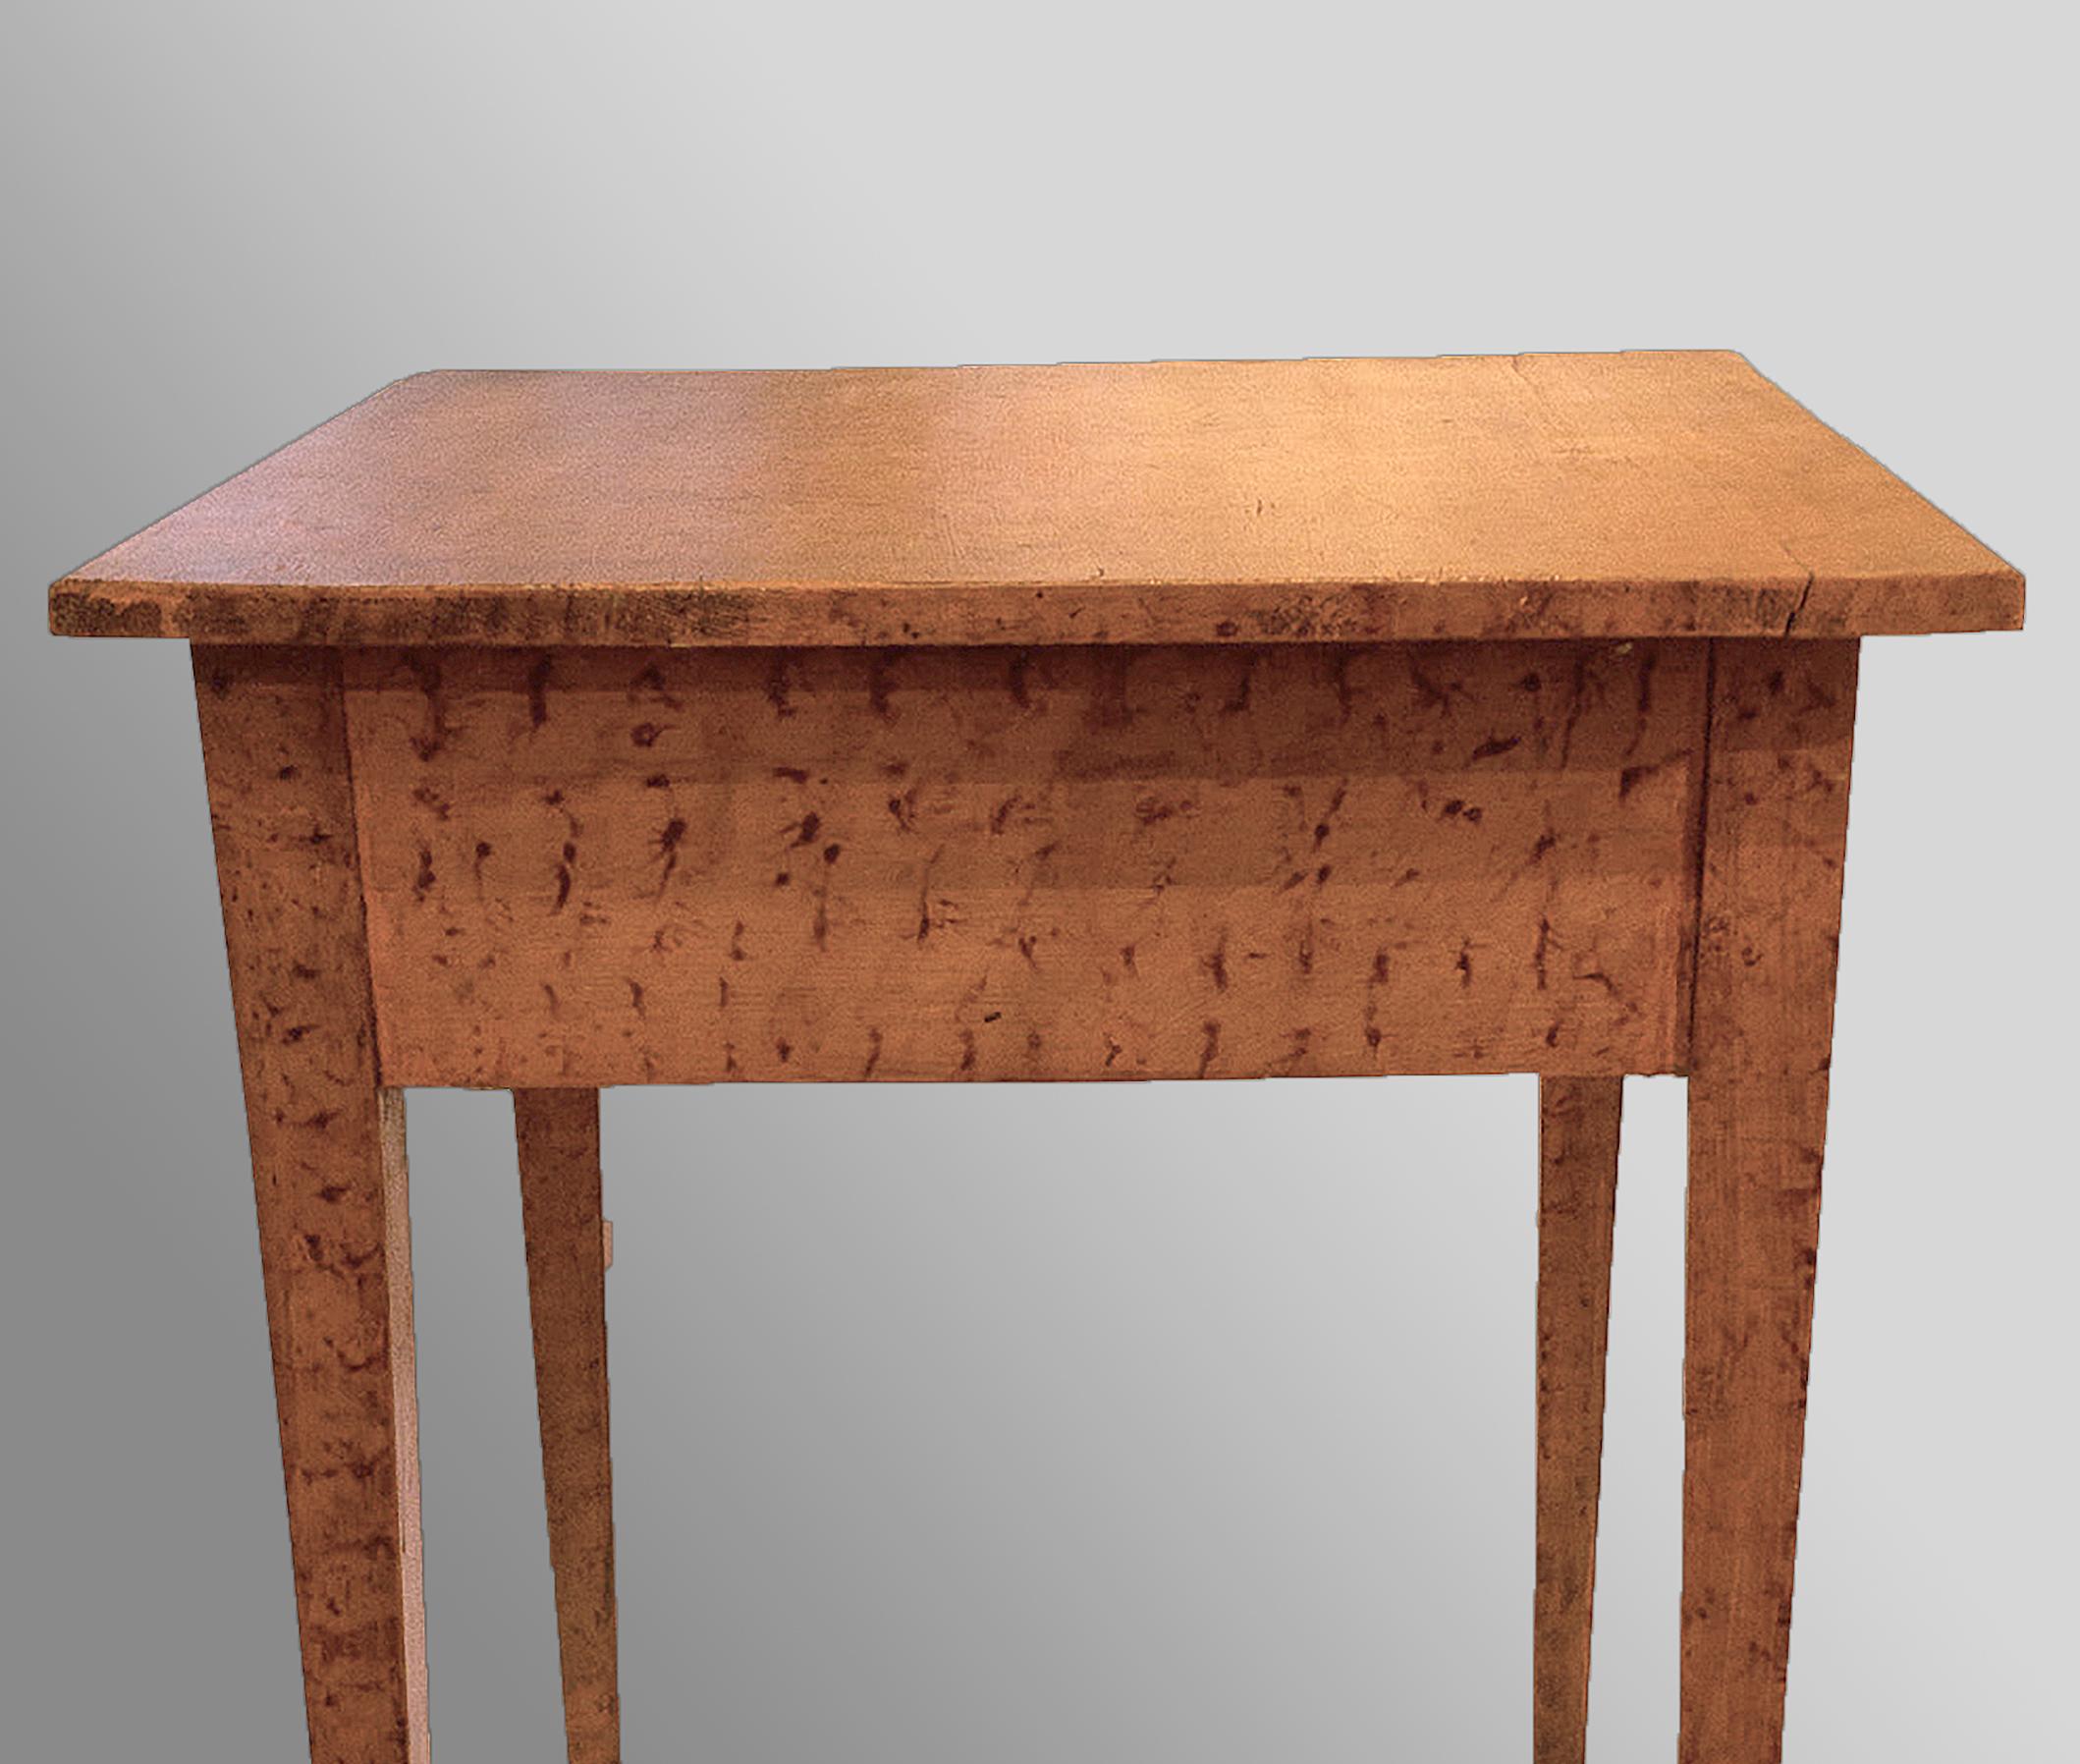 One drawer with wooden pull with salmon sponge paint decoration on squared tapered legs. Original paint made of walnut and poplar. Berks County, circa 1820.

Measures: 30 ½” x 24” x 23 ¾”.